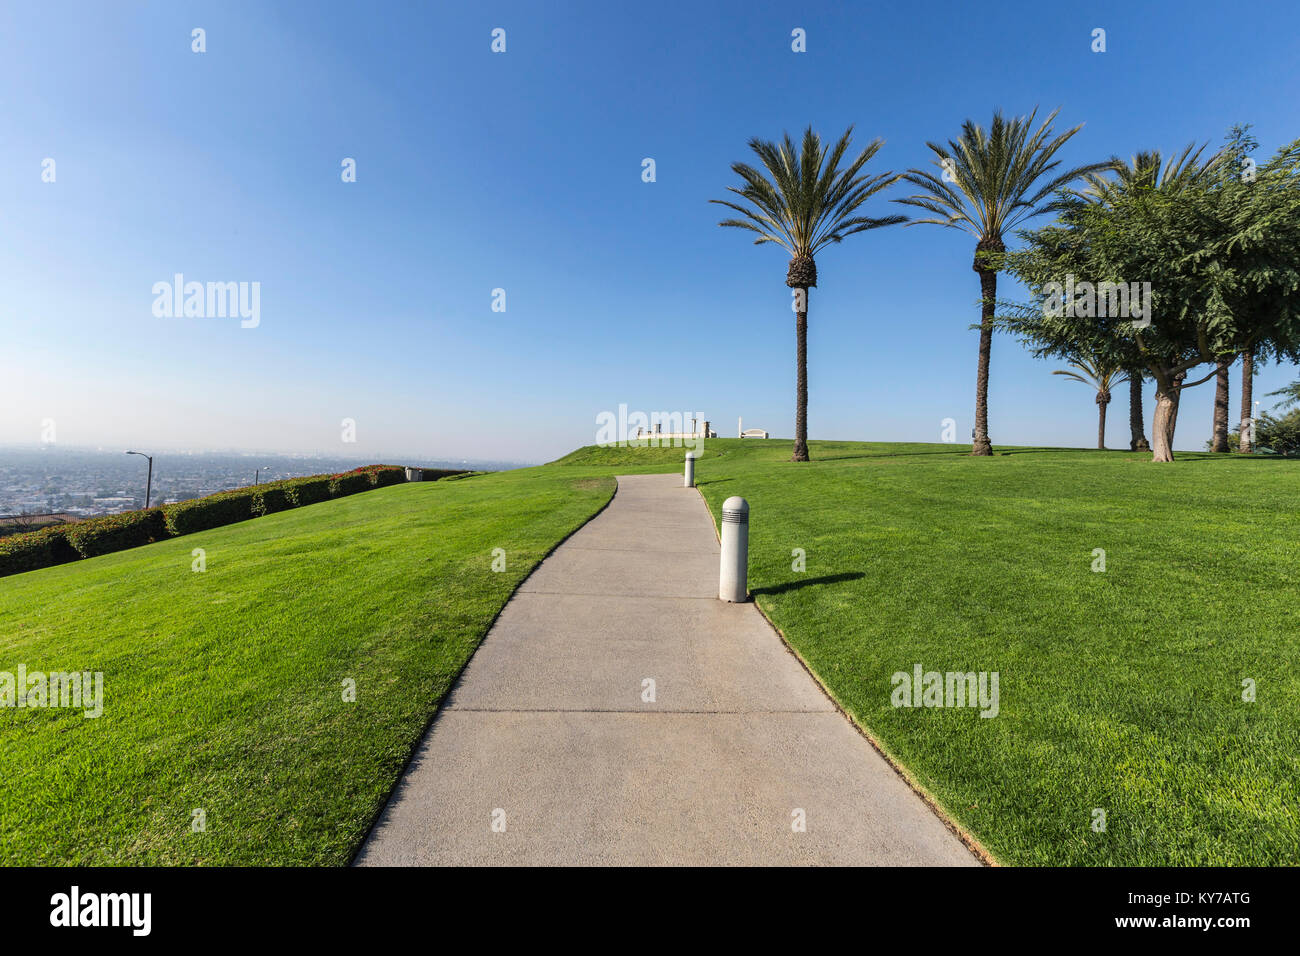 Palm trees, green grass and city views at Signal Hill Hilltop Park in Long Beach California. Stock Photo